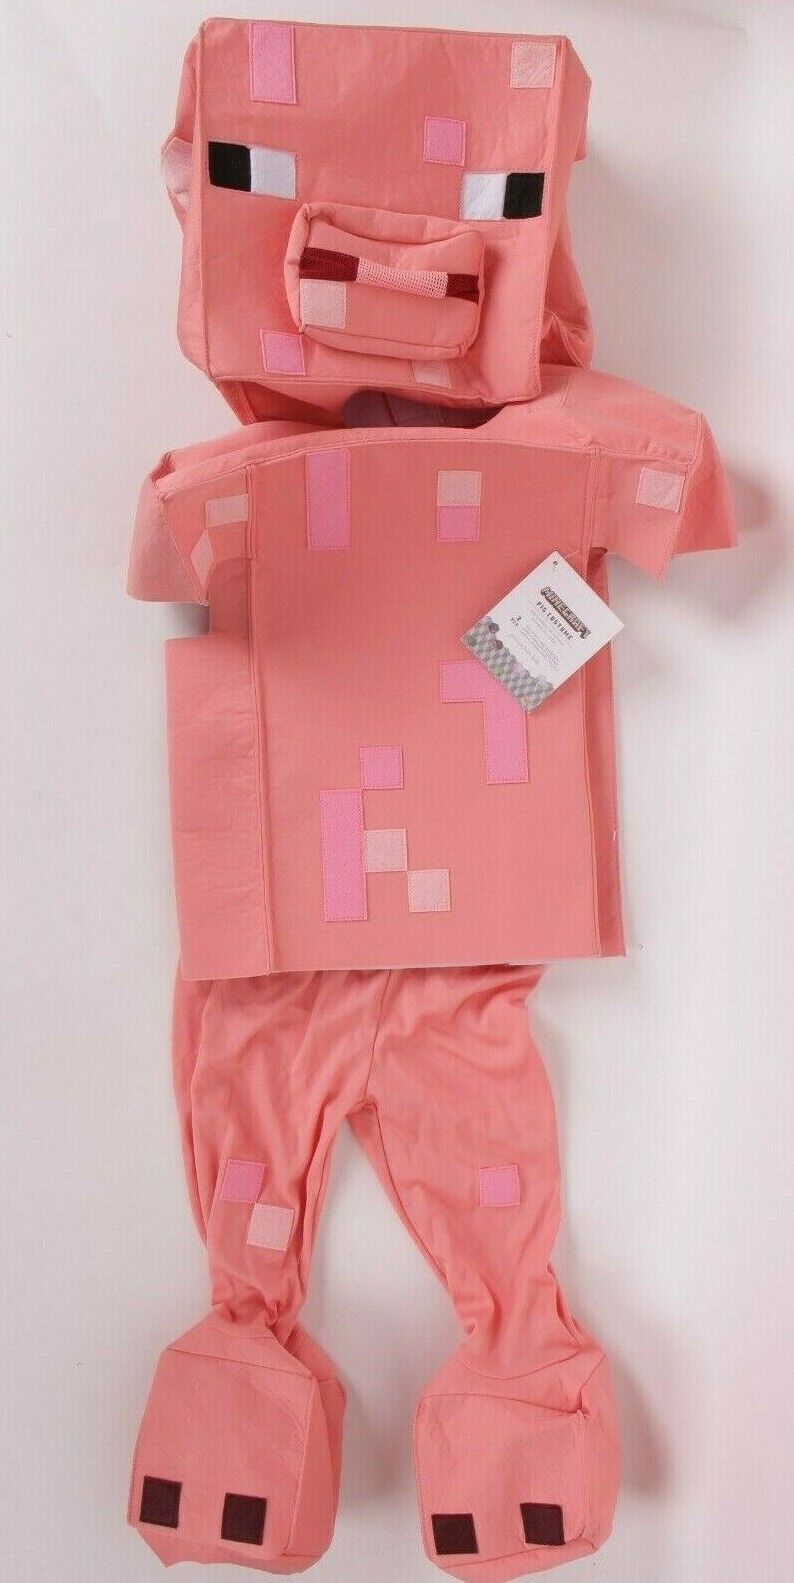 3-pc Pottery Barn Kids Minecraft Pig toddler Halloween costume, size 3T